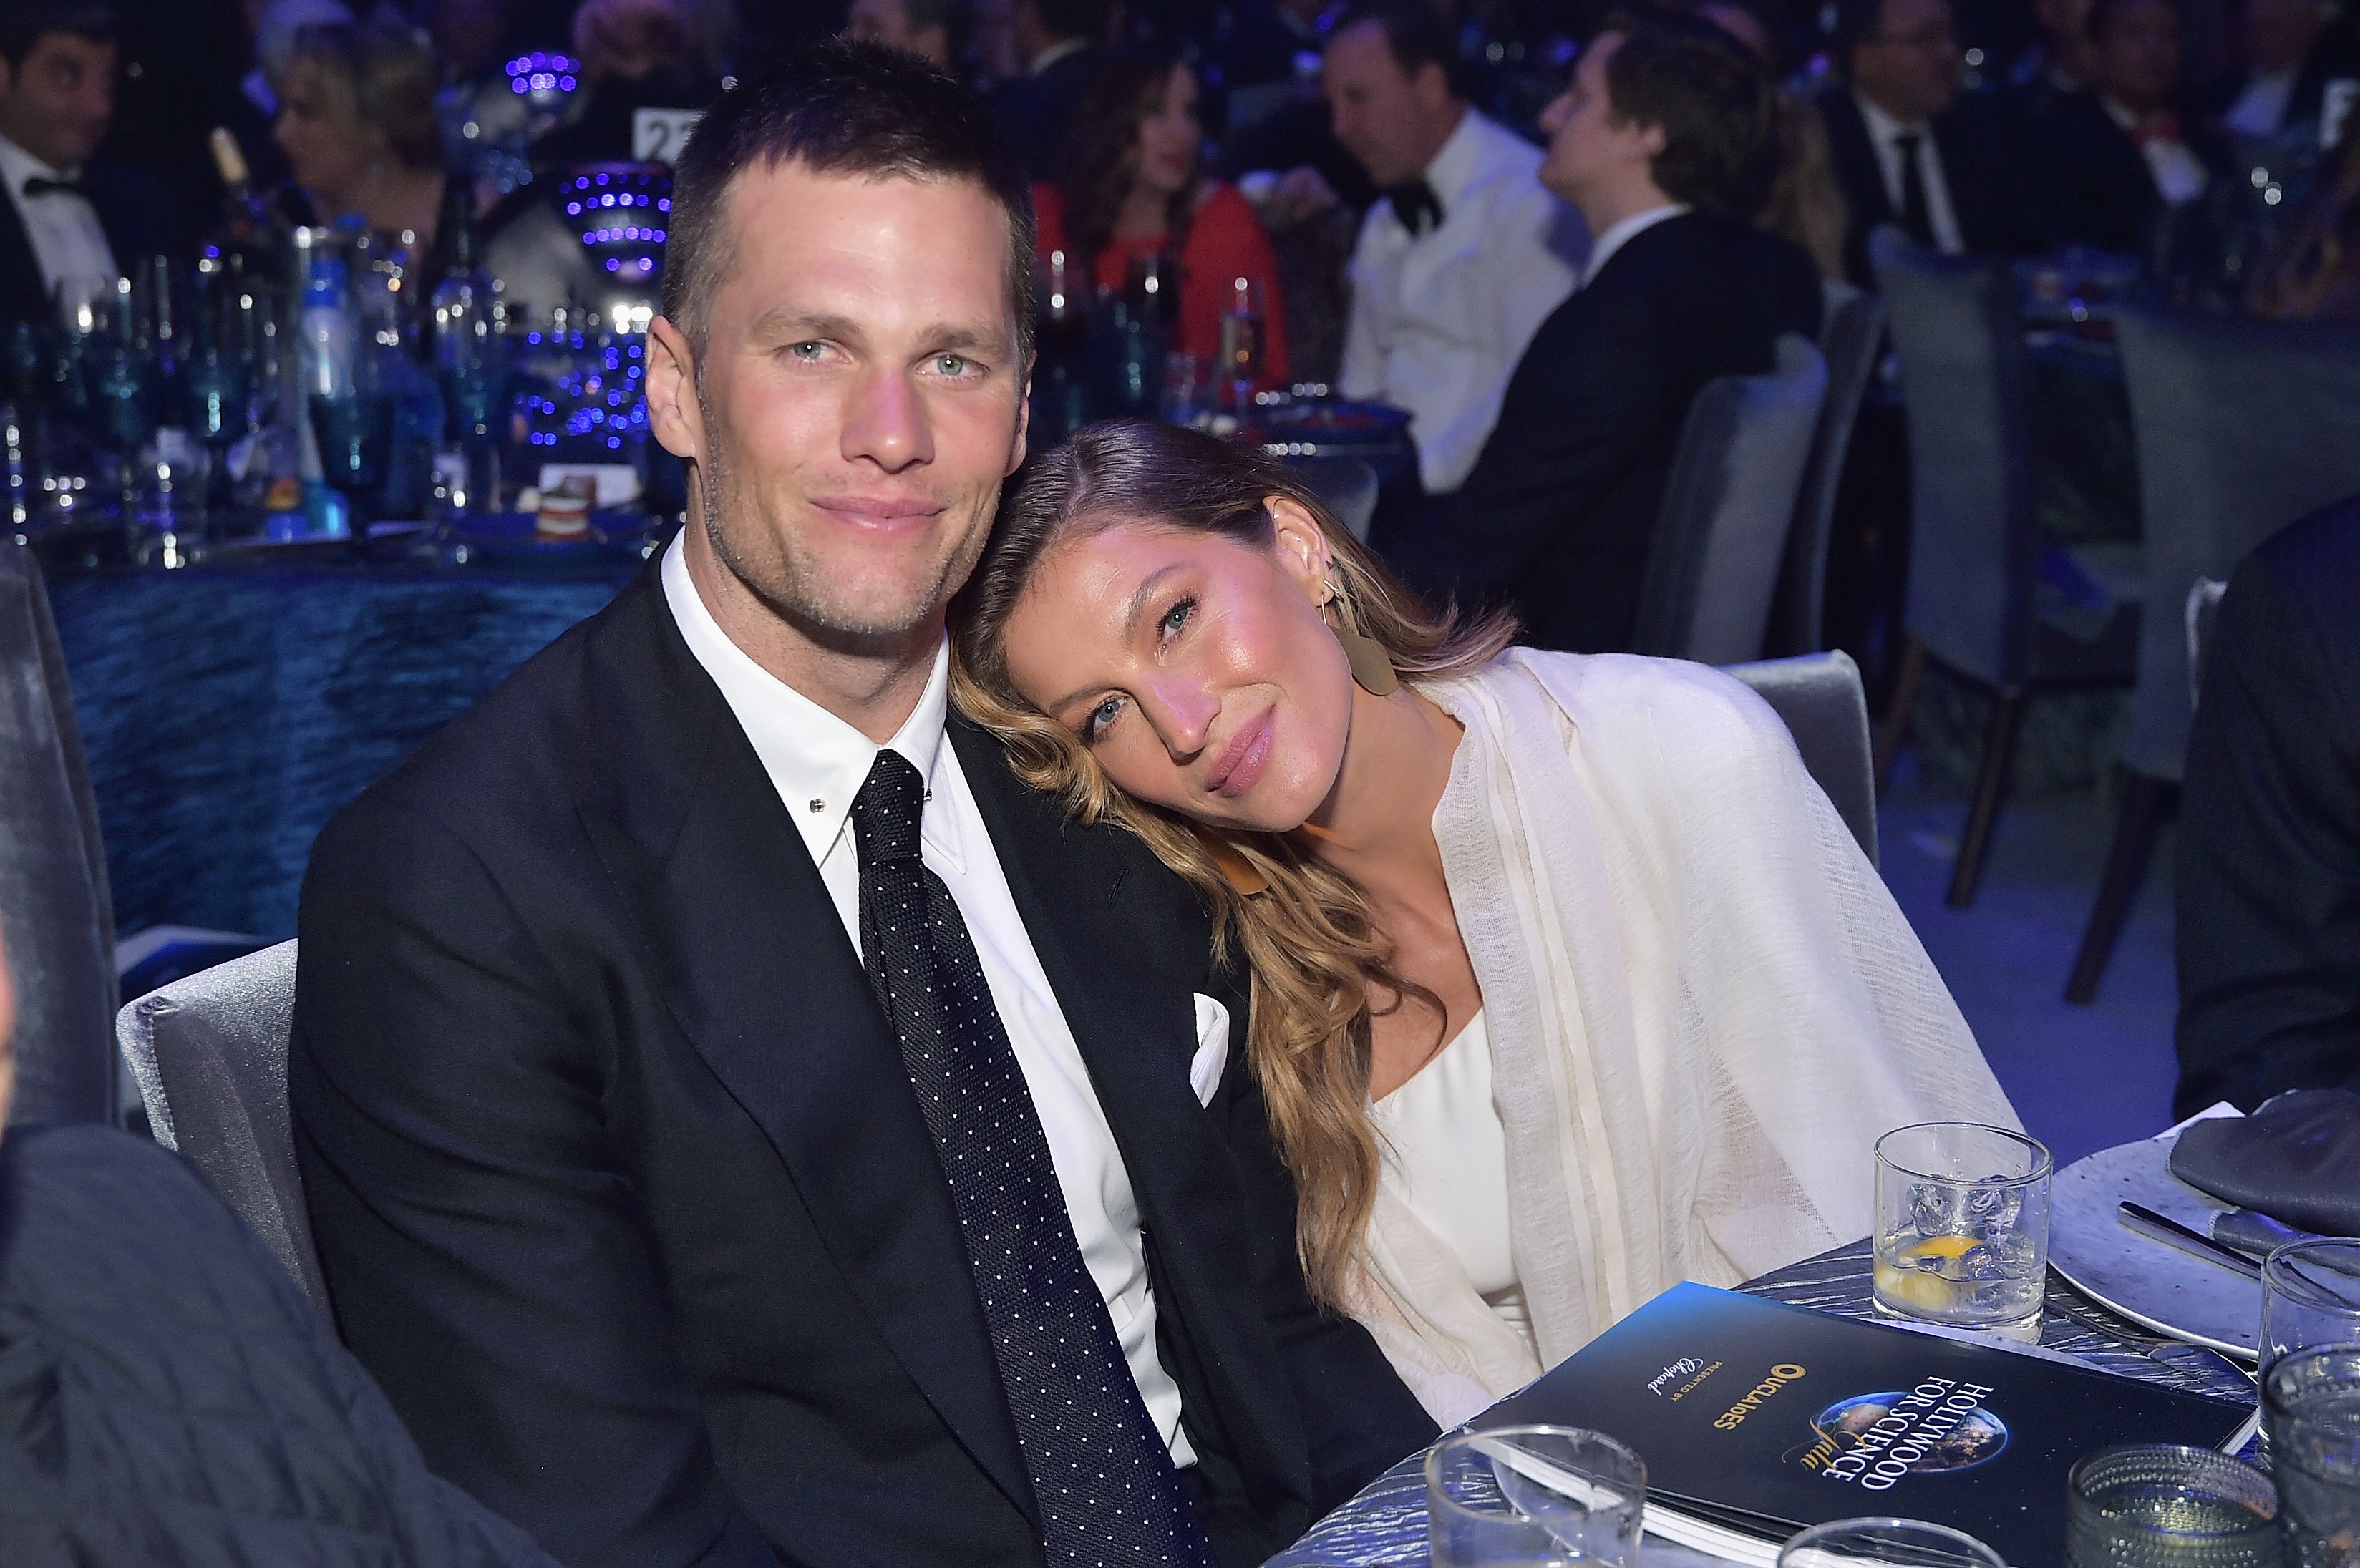 Tom Brady and Gisele Bündchen attend the UCLA IoES honors Barbra Streisand and Gisele Bundchen at the 2019 Hollywood for Science Gala 